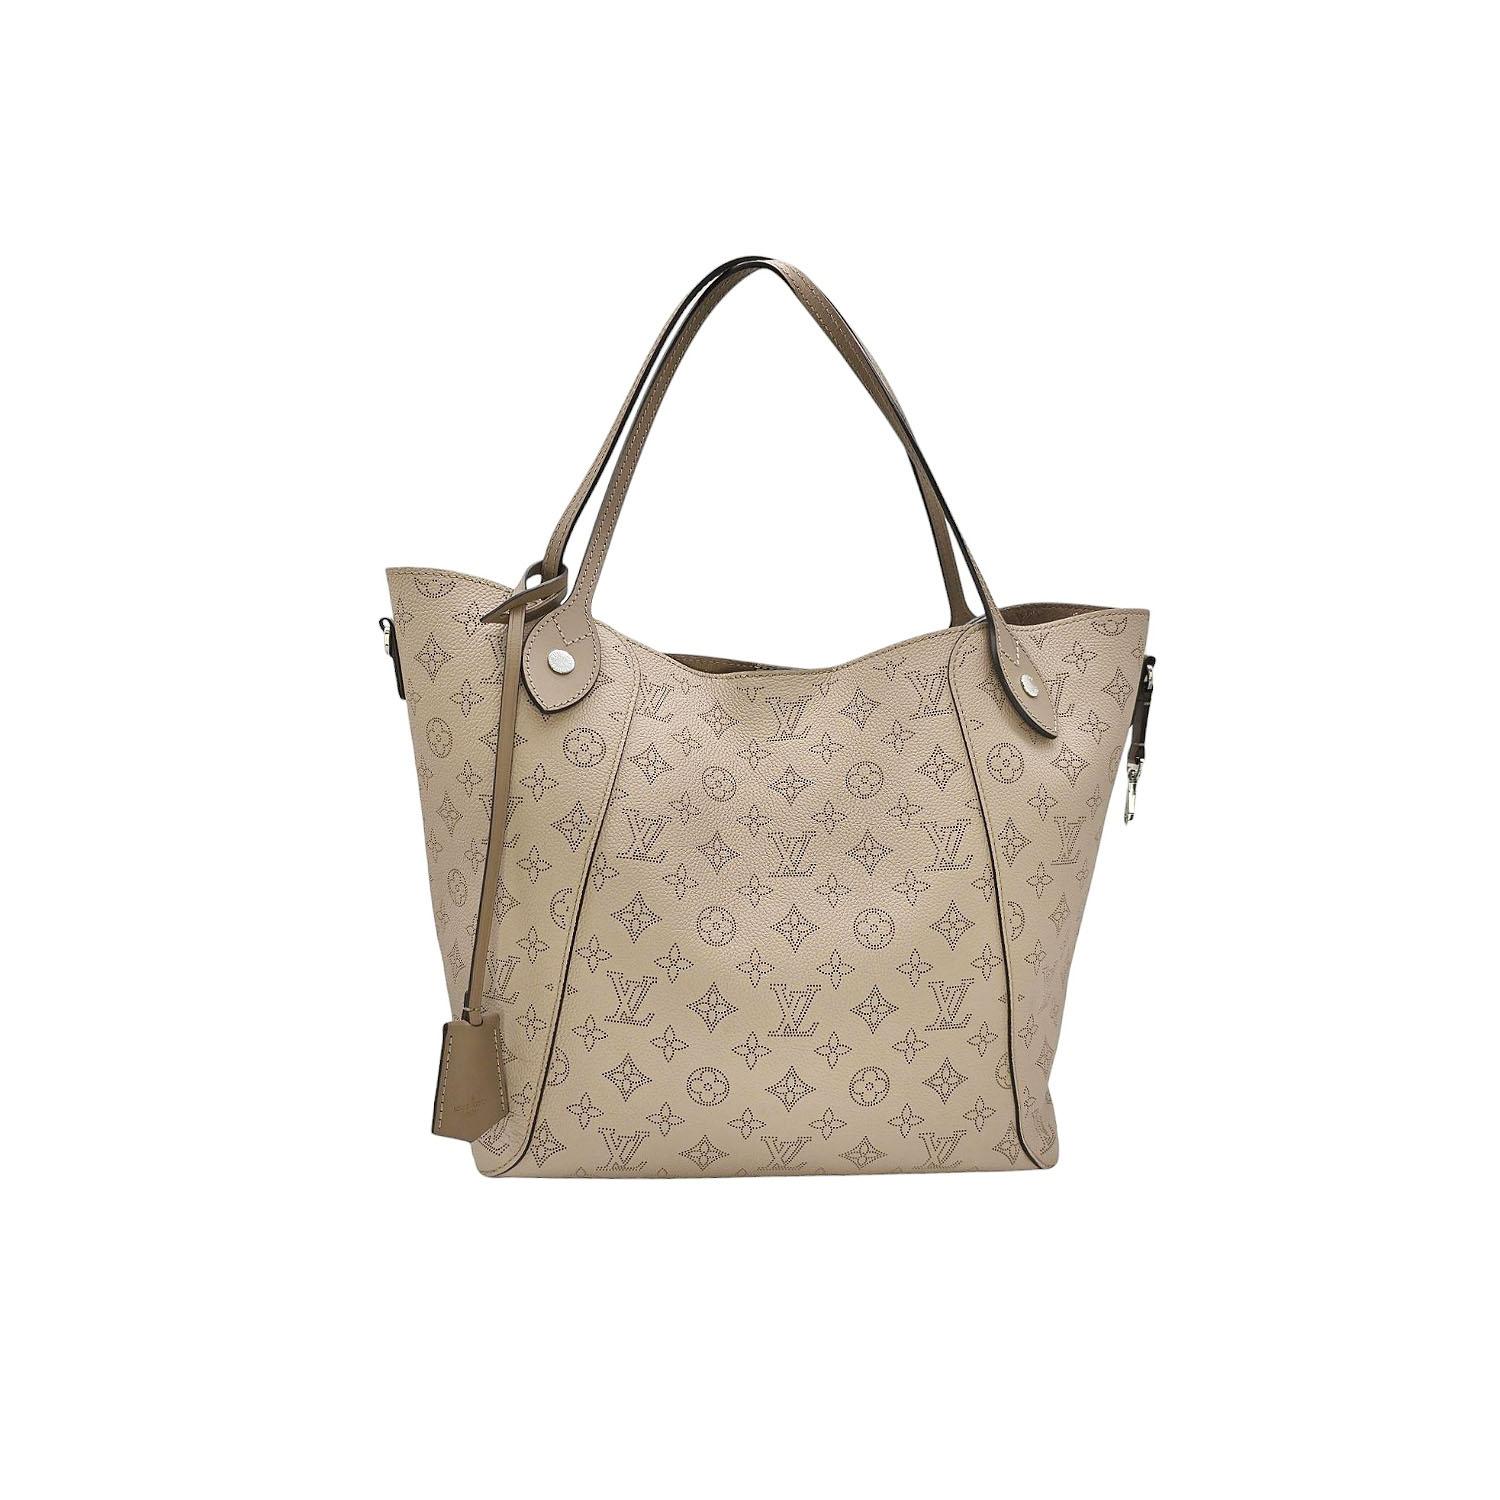 Louis Vuitton Galat Monogram Mahina Hina MM Tote w/ Pouch In Excellent Condition For Sale In Scottsdale, AZ